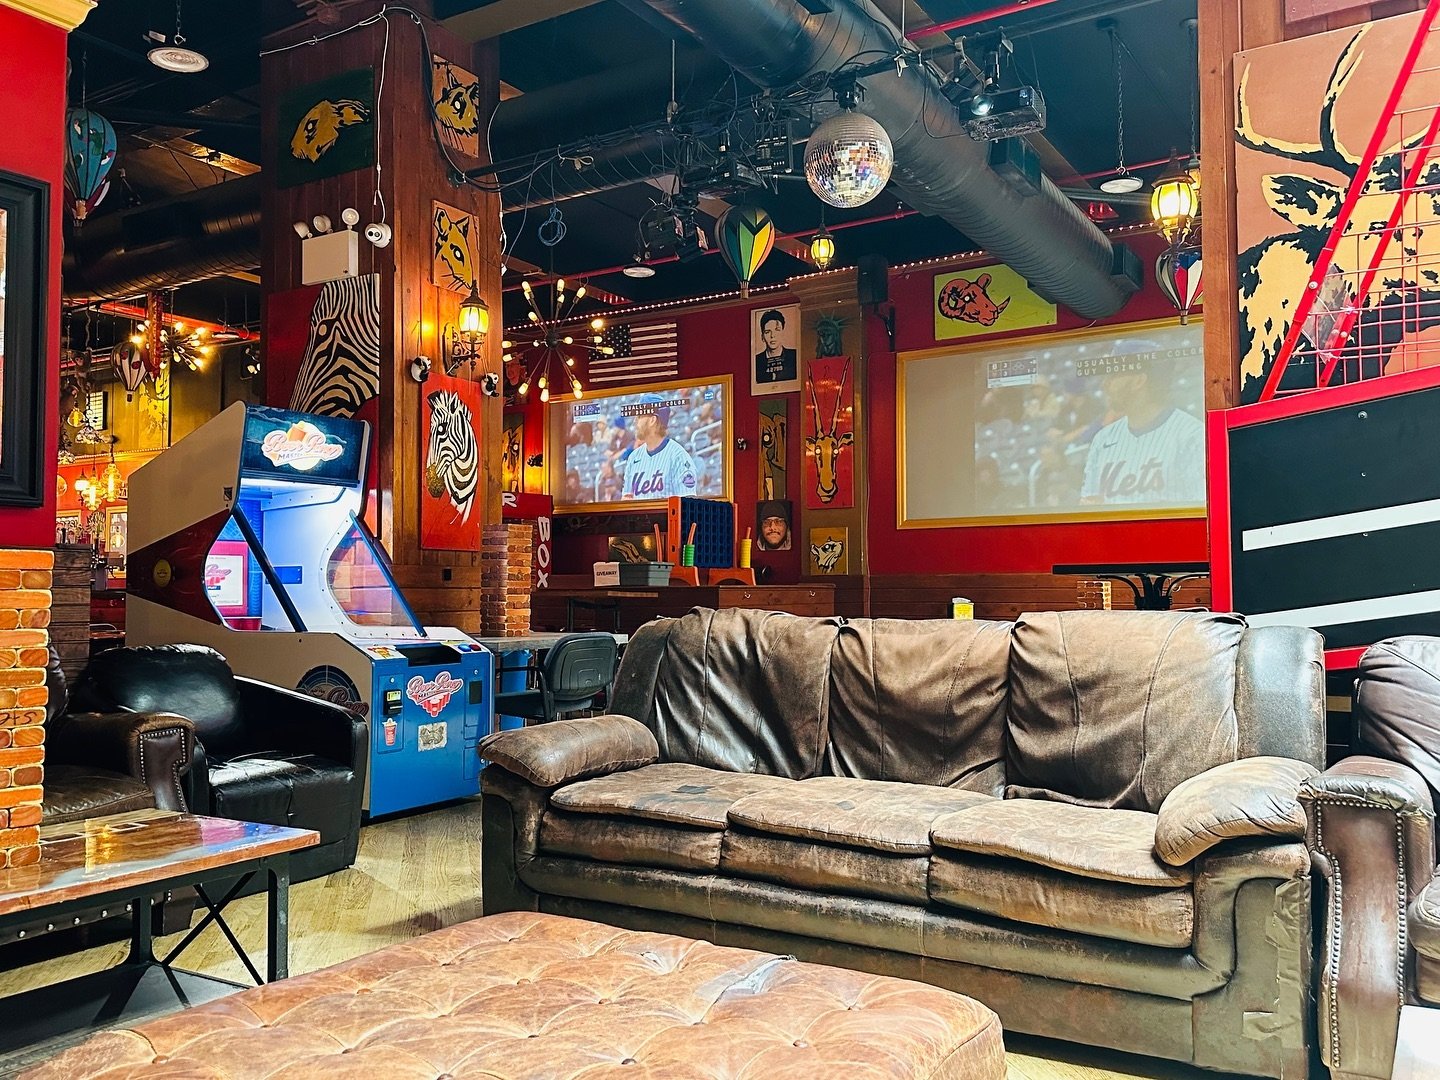 We are one of the best bars to socialize in New York City! Our set up is perfect for meeting new people &amp; making great conversations! 

#pioneersbar #pioneers #bar #nyc #newyork #drinks #beers #draft #tvs #sports #games #fun #goodvibes #socialize